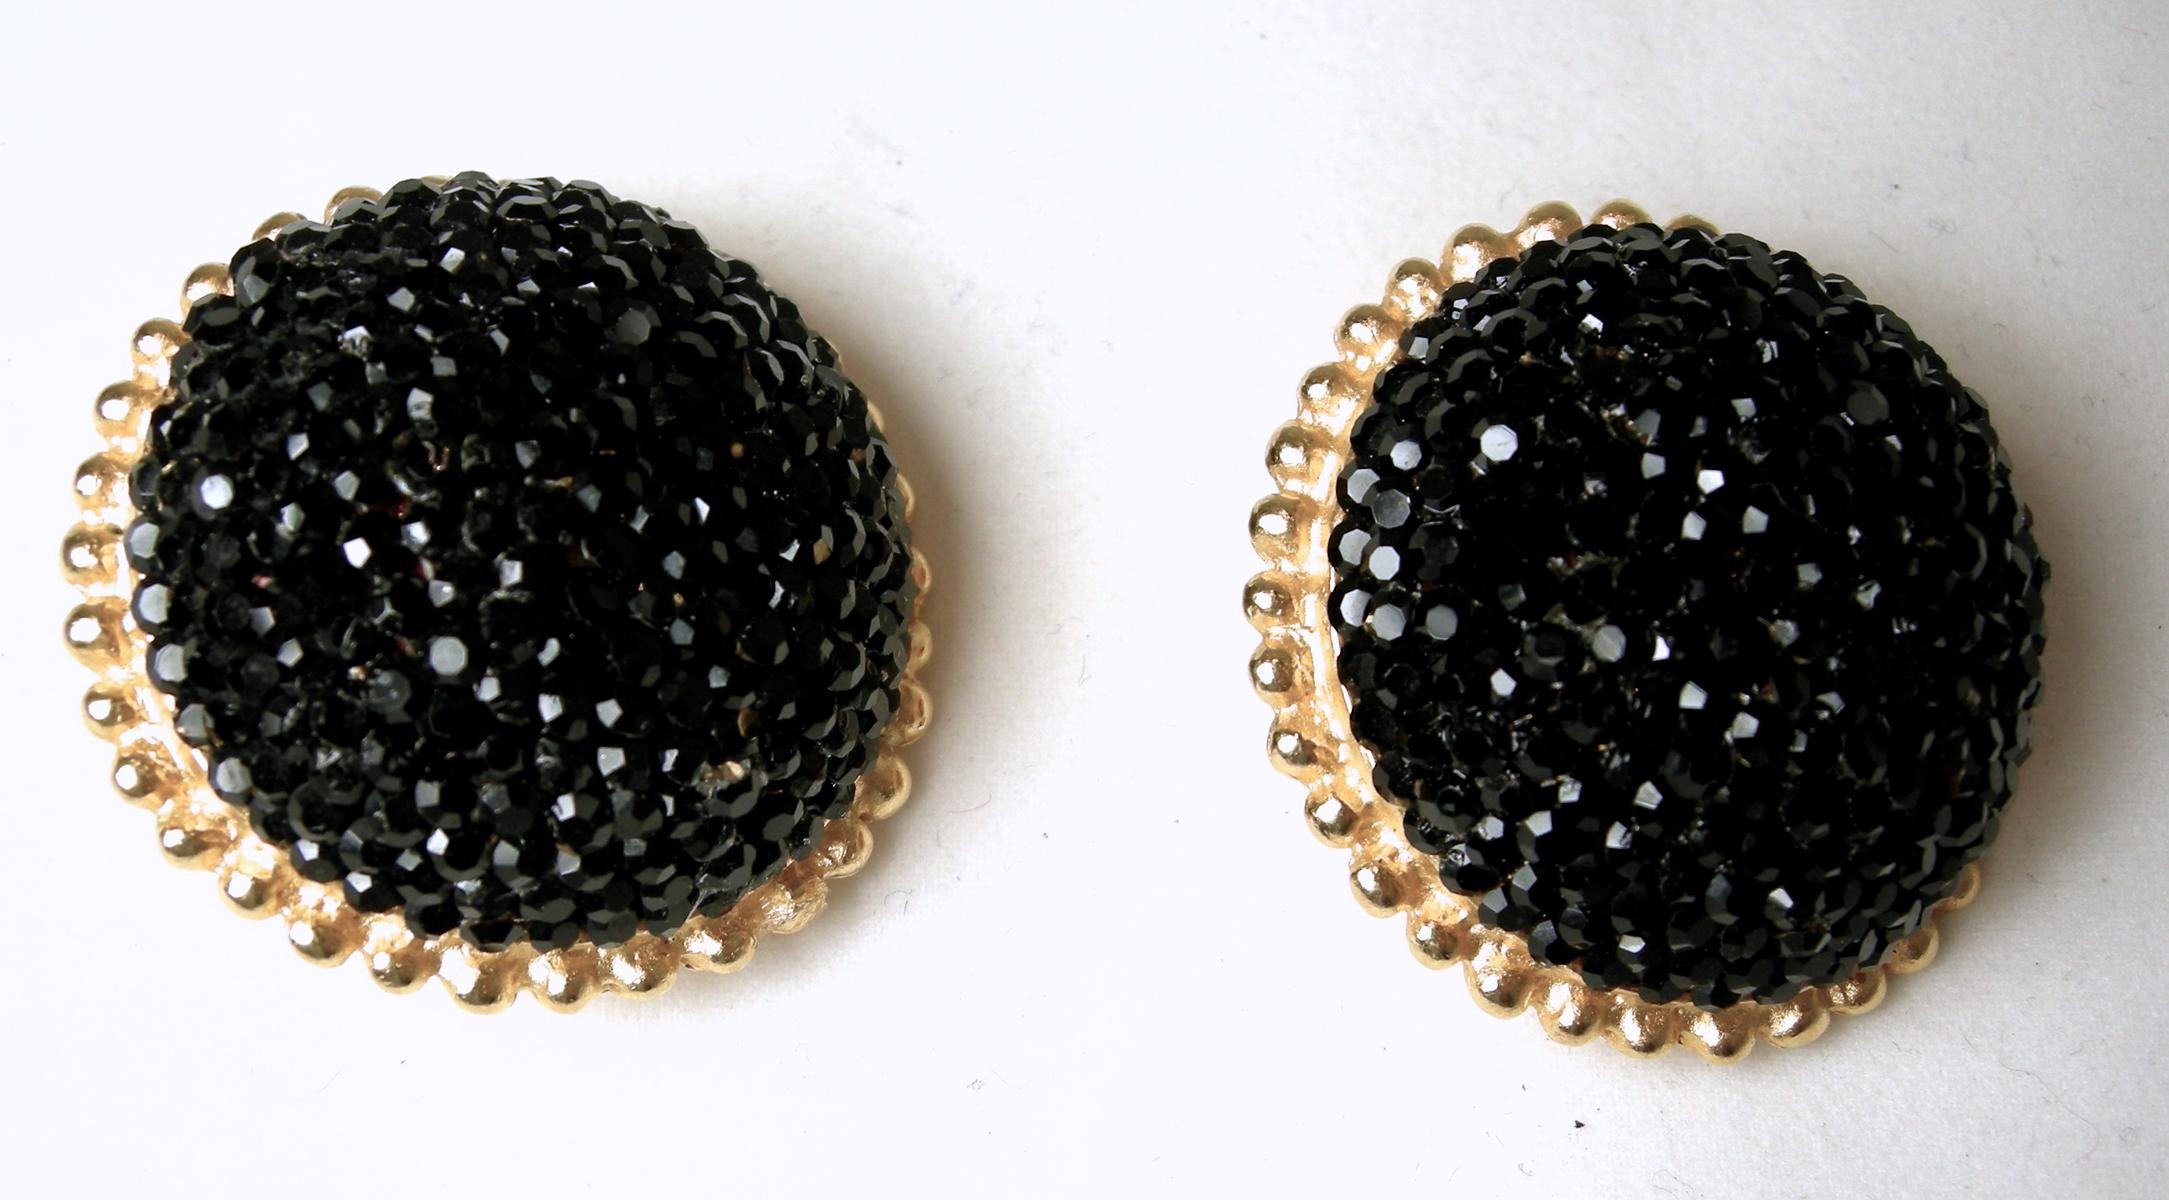 These vintage signed Deanna Hamro earrings have a dome design with black faceted crystals in a gold tone setting.  In excellent condition, these clip earrings measure 1-1/4” across/diameter and are signed “Deanna Hamro”.